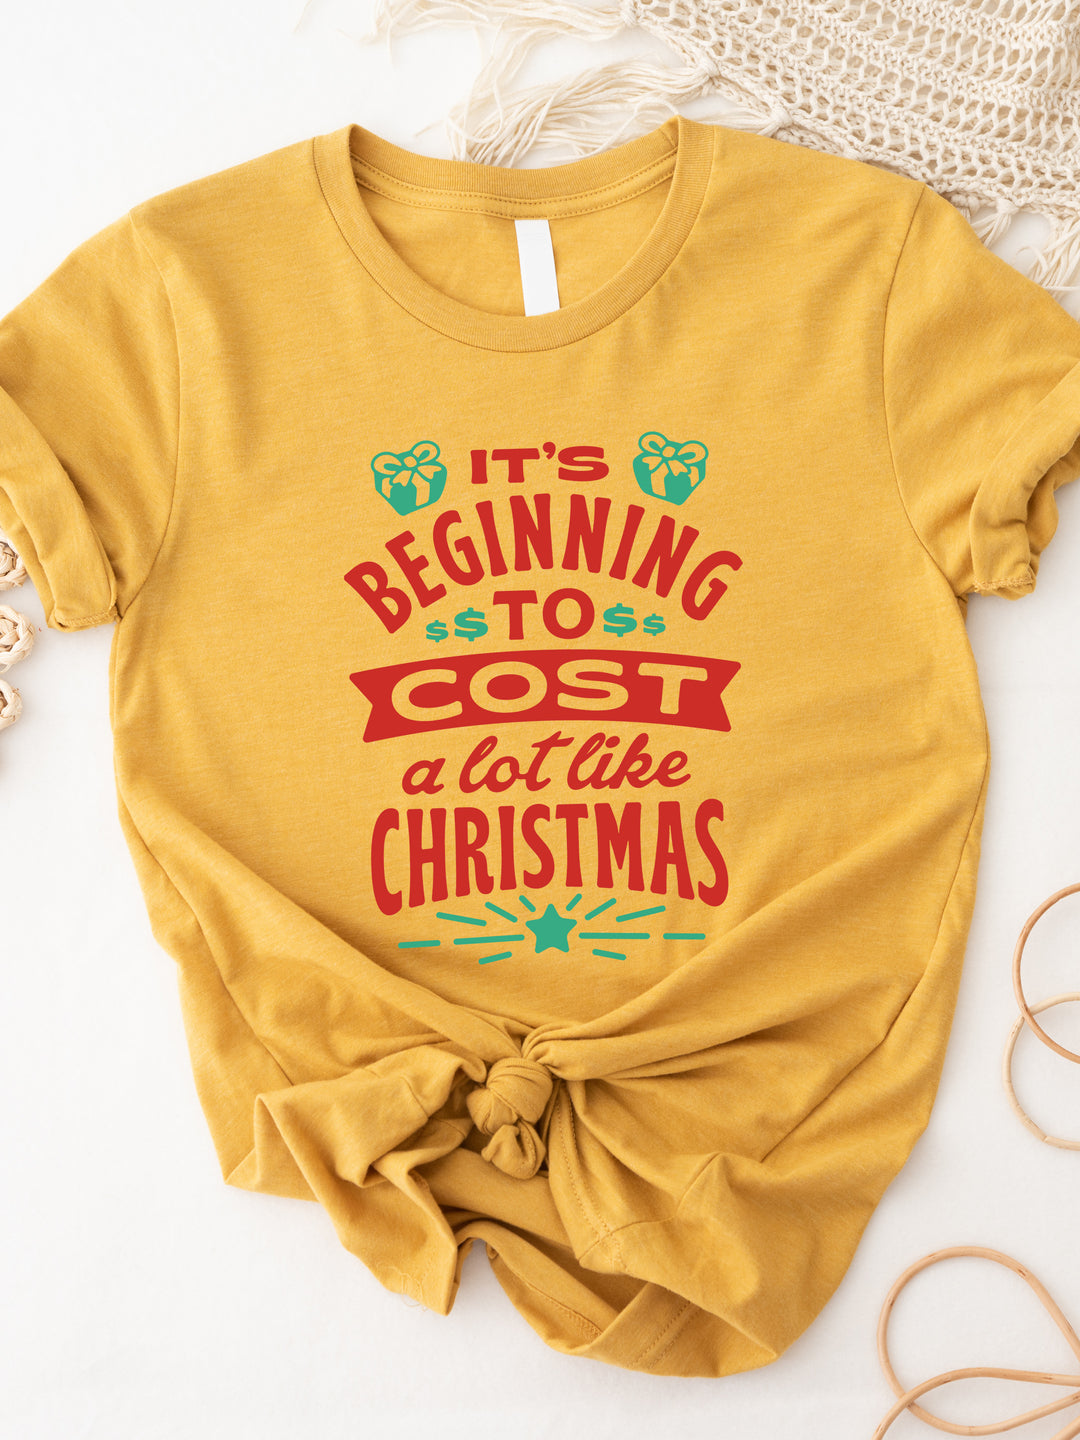 It's Beginning To Cost A lot Like Christmas Graphic Tee